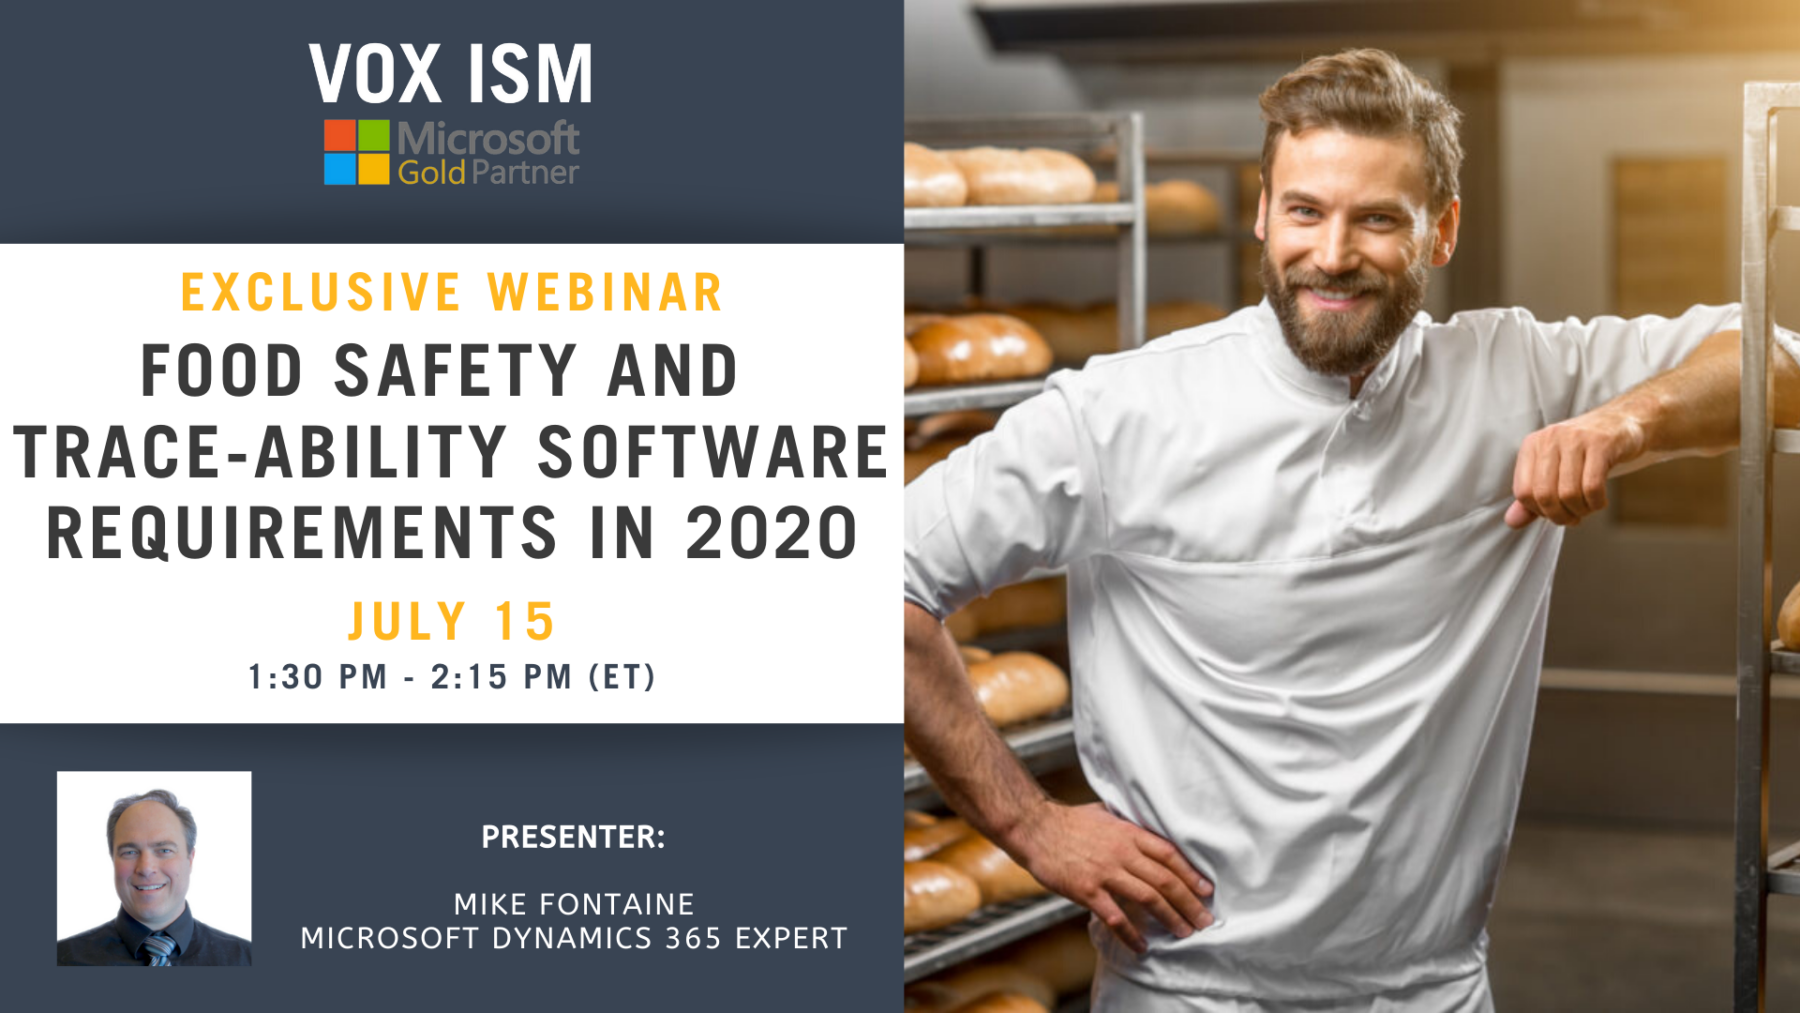 Food Safety and Trace-ability Software Requirements in 2020 - July 15 - Webinar VOX ISM